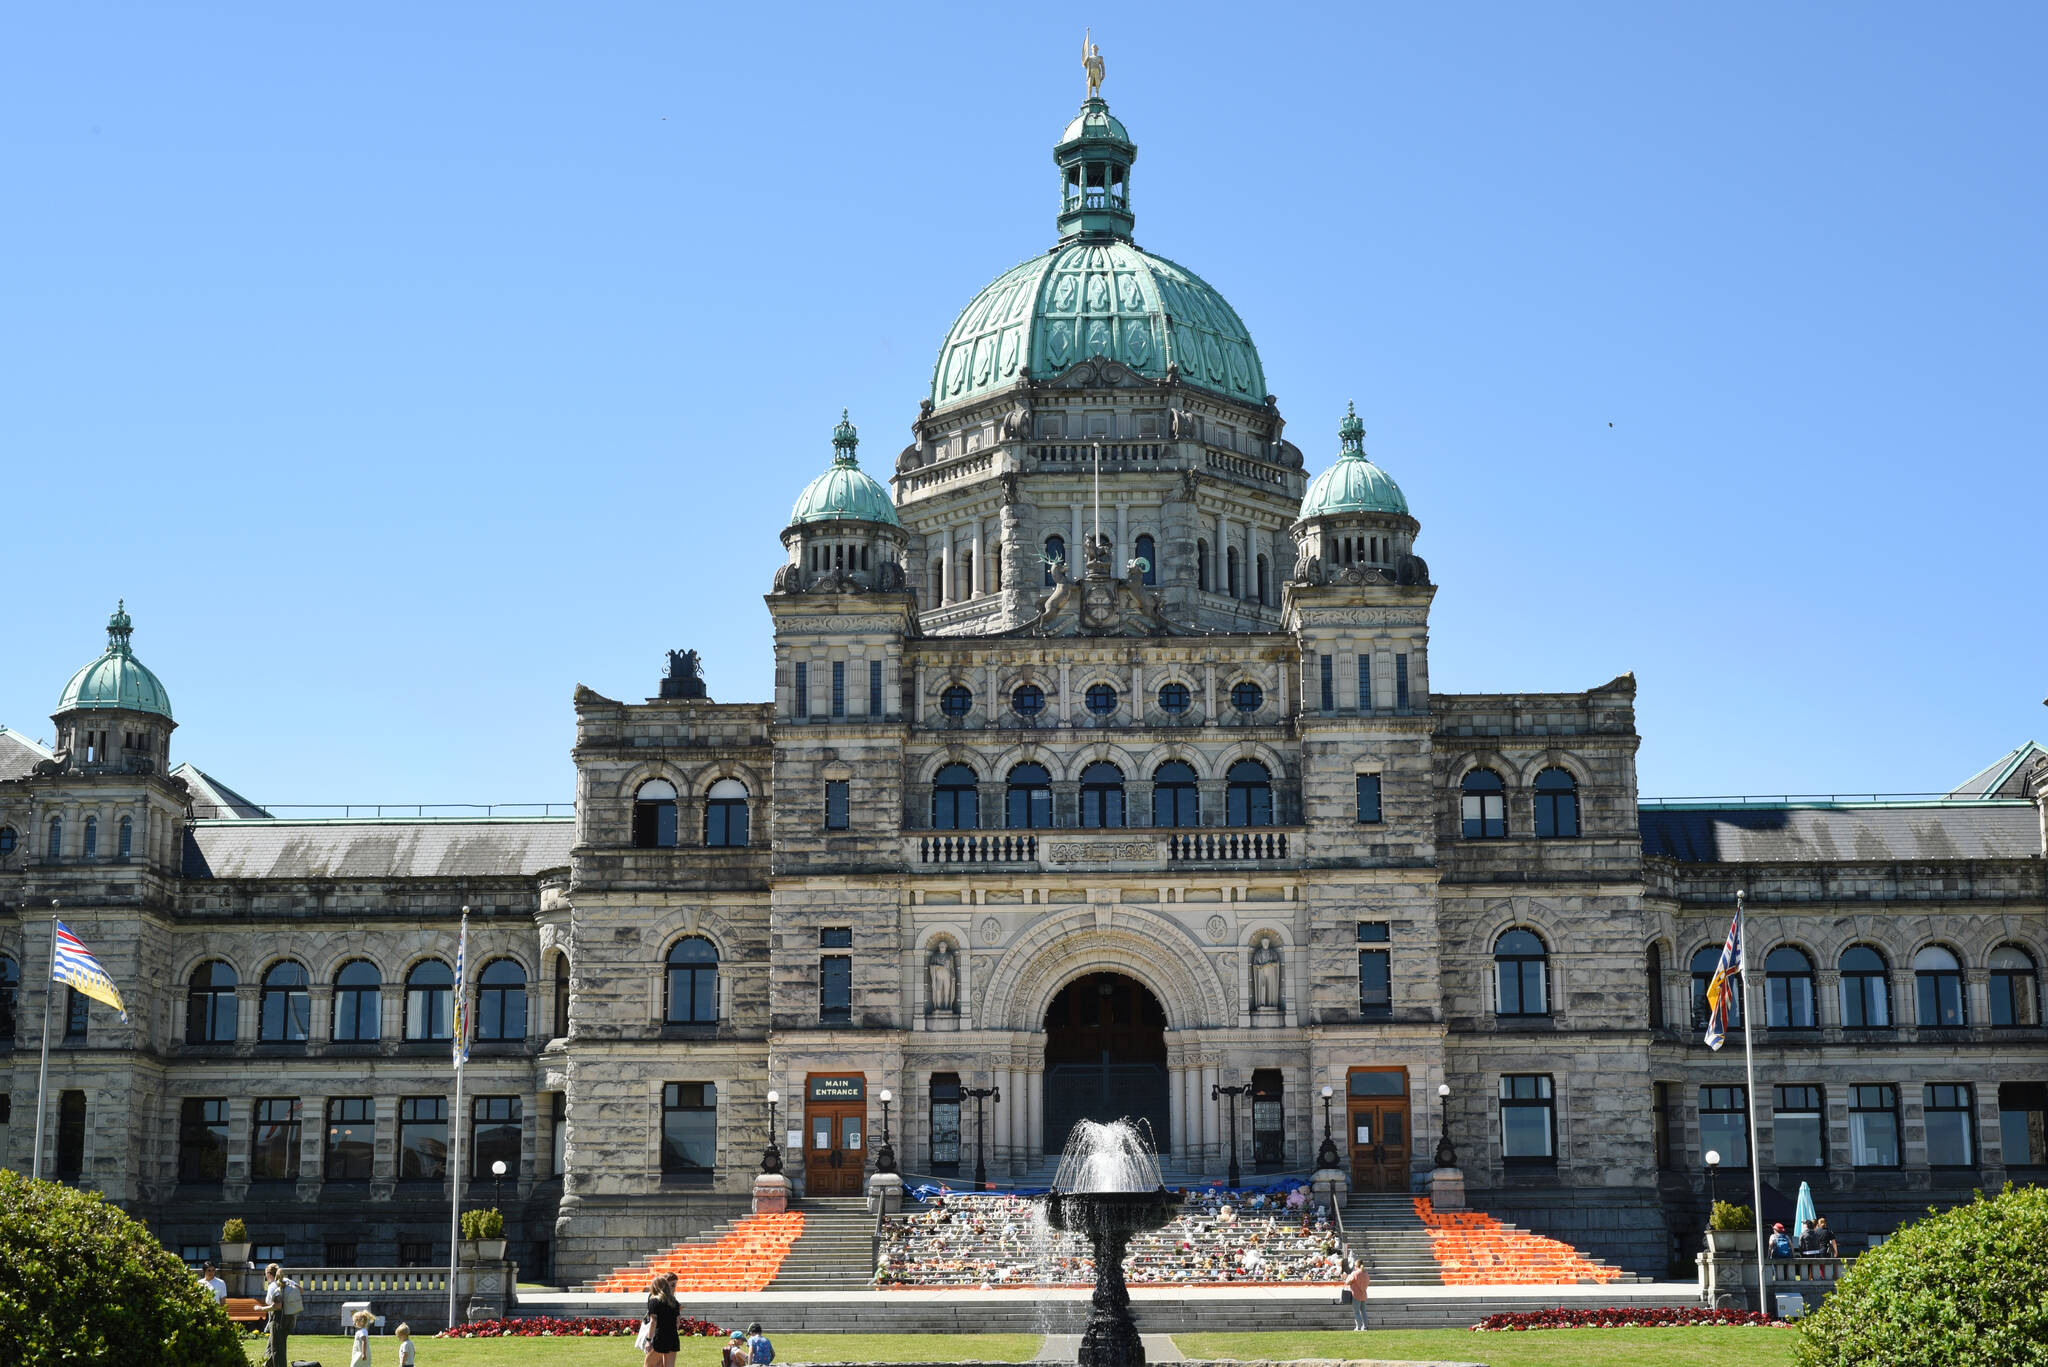 According to B.C.’s fixed election date legislation, the next provincial election will take place on or before Oct. 19, 2024. A poll from Angus Reid Institute gives the NDP a comfortable lead, but the survey also shows dissatisfaction with the government’s handling of key issues such as cost-of-living, health care and housing. (Black Press Media file photo)